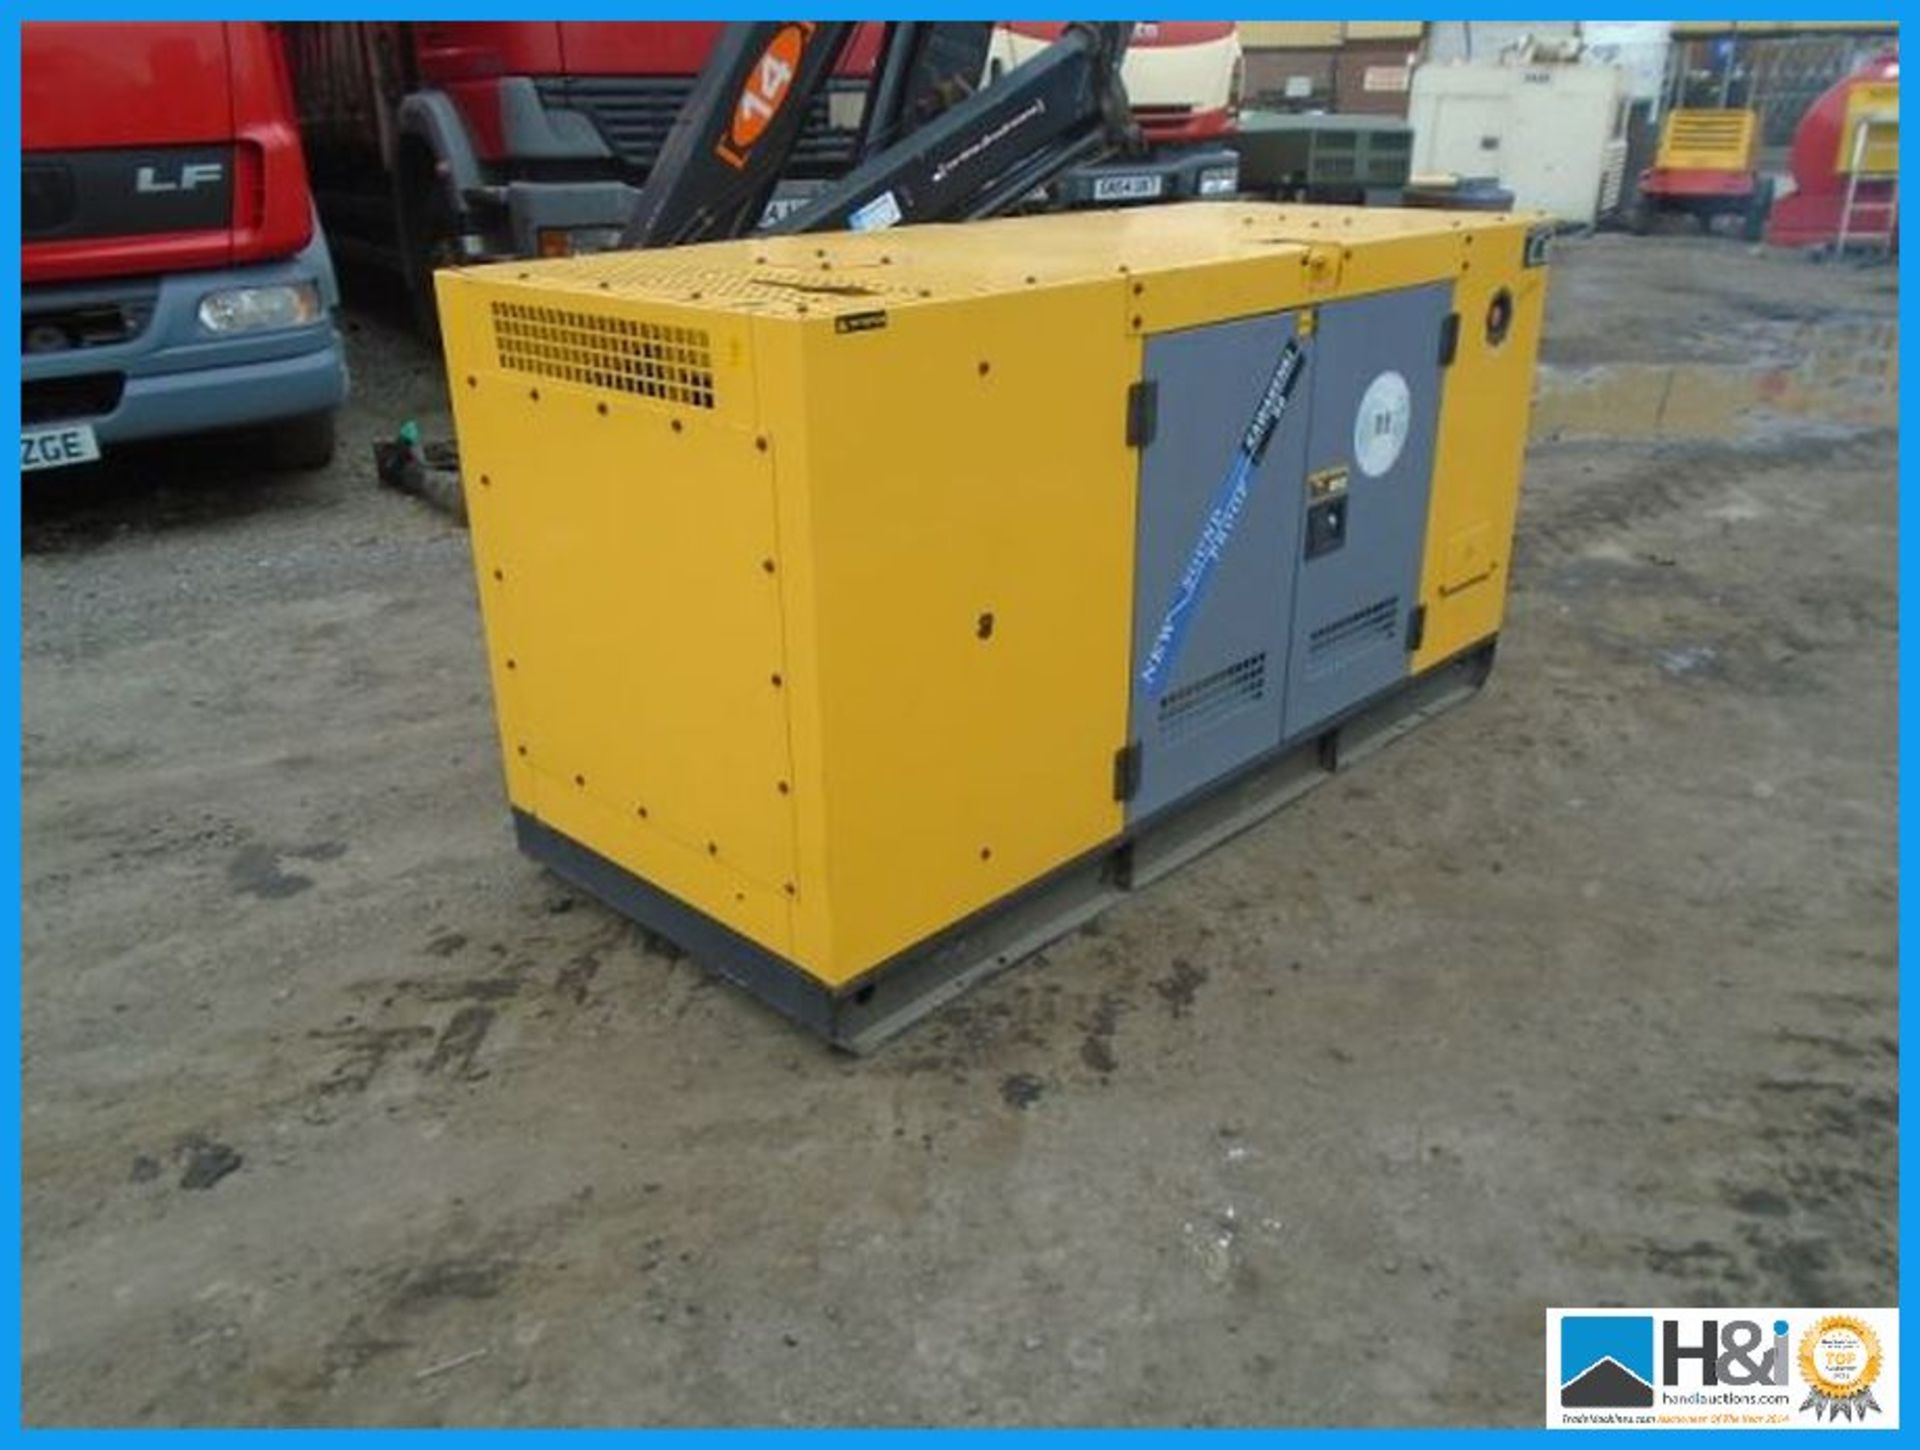 50 KVA BRAND NEW GENERATOR , 2016 IN YEAR ,3 PHASE AND SINGLE Appraisal: Viewing Essential Serial